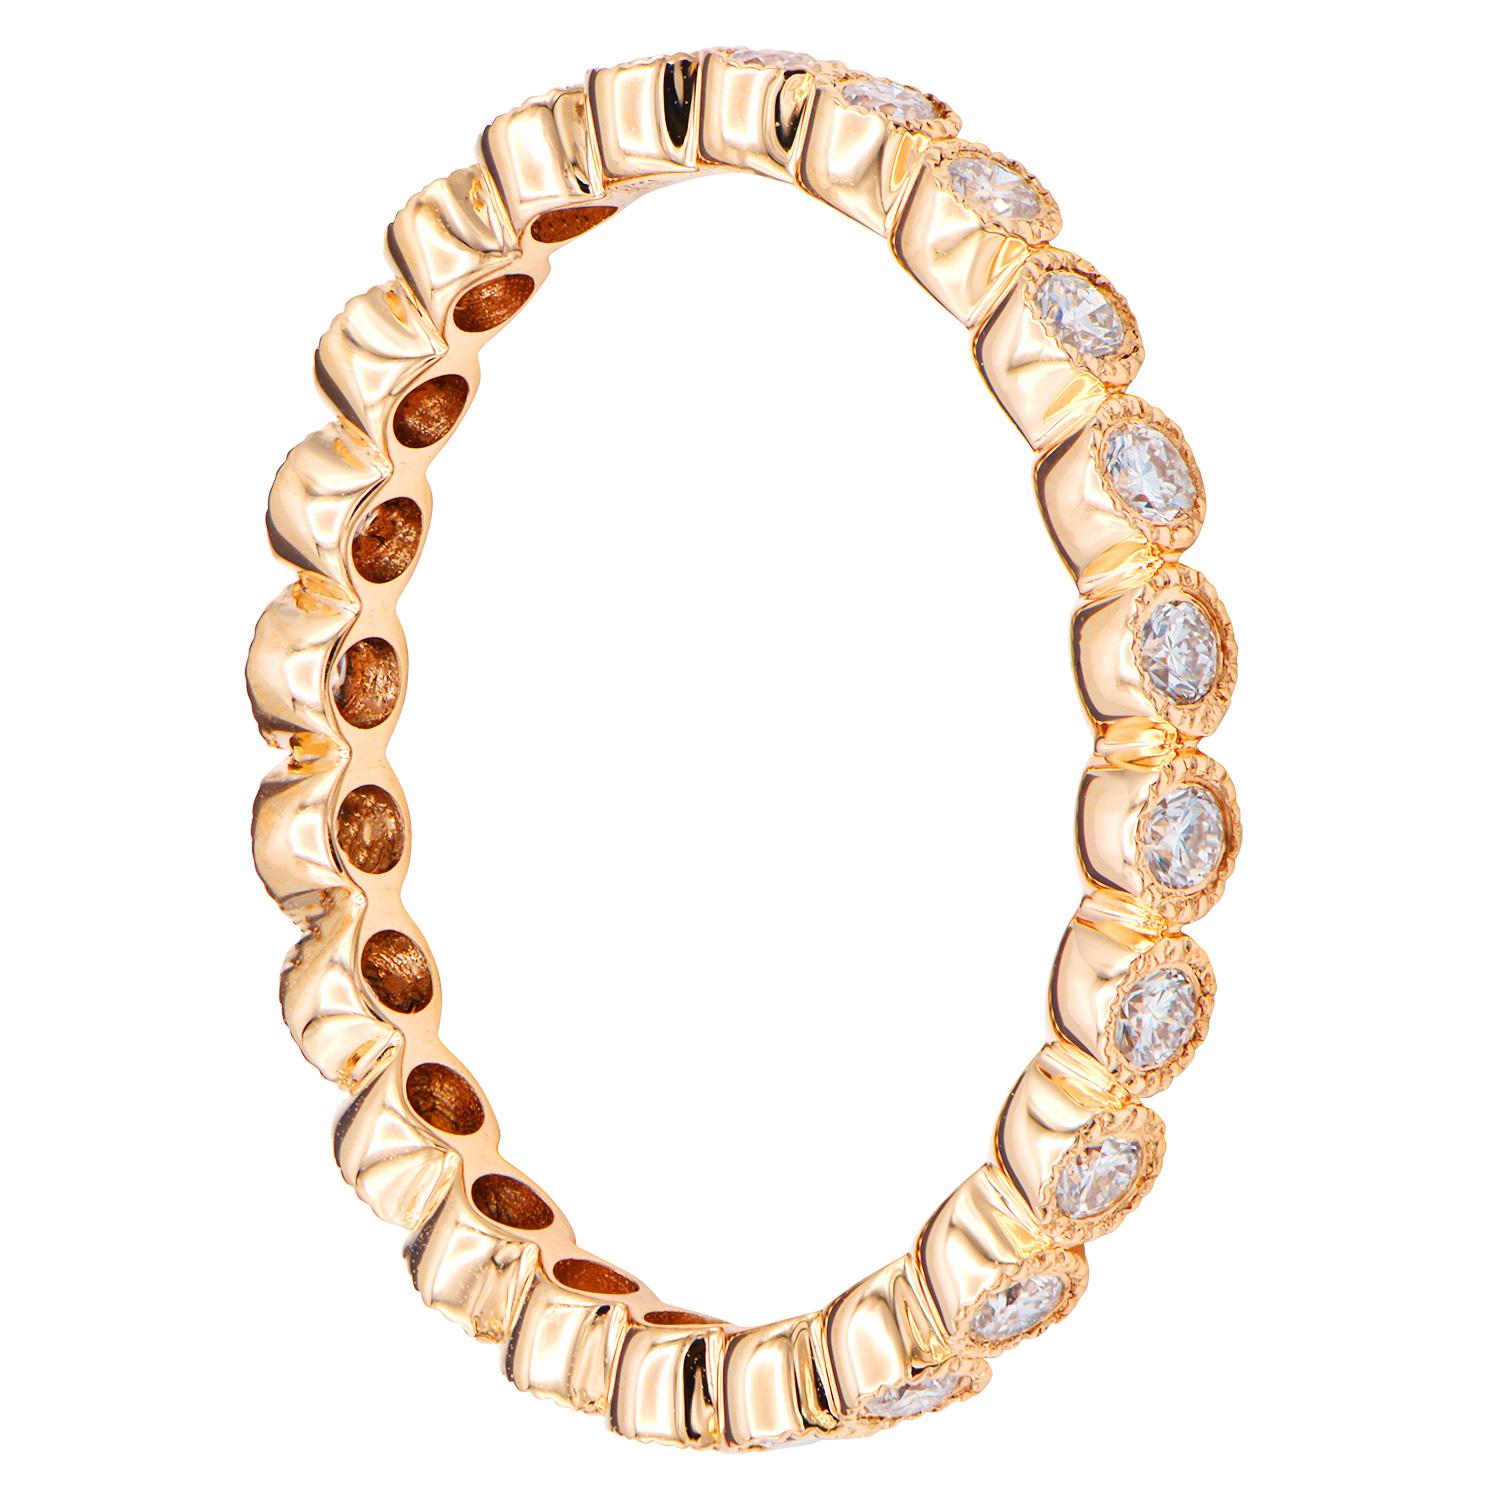 This stunning 18K rose gold eternity ring is made from 1.9 grams of gold. There are 23 round VS2, G color diamonds all the way around the ring totaling 0.44 carats. The gold around the diamonds has beautiful details to create this bezel setting.